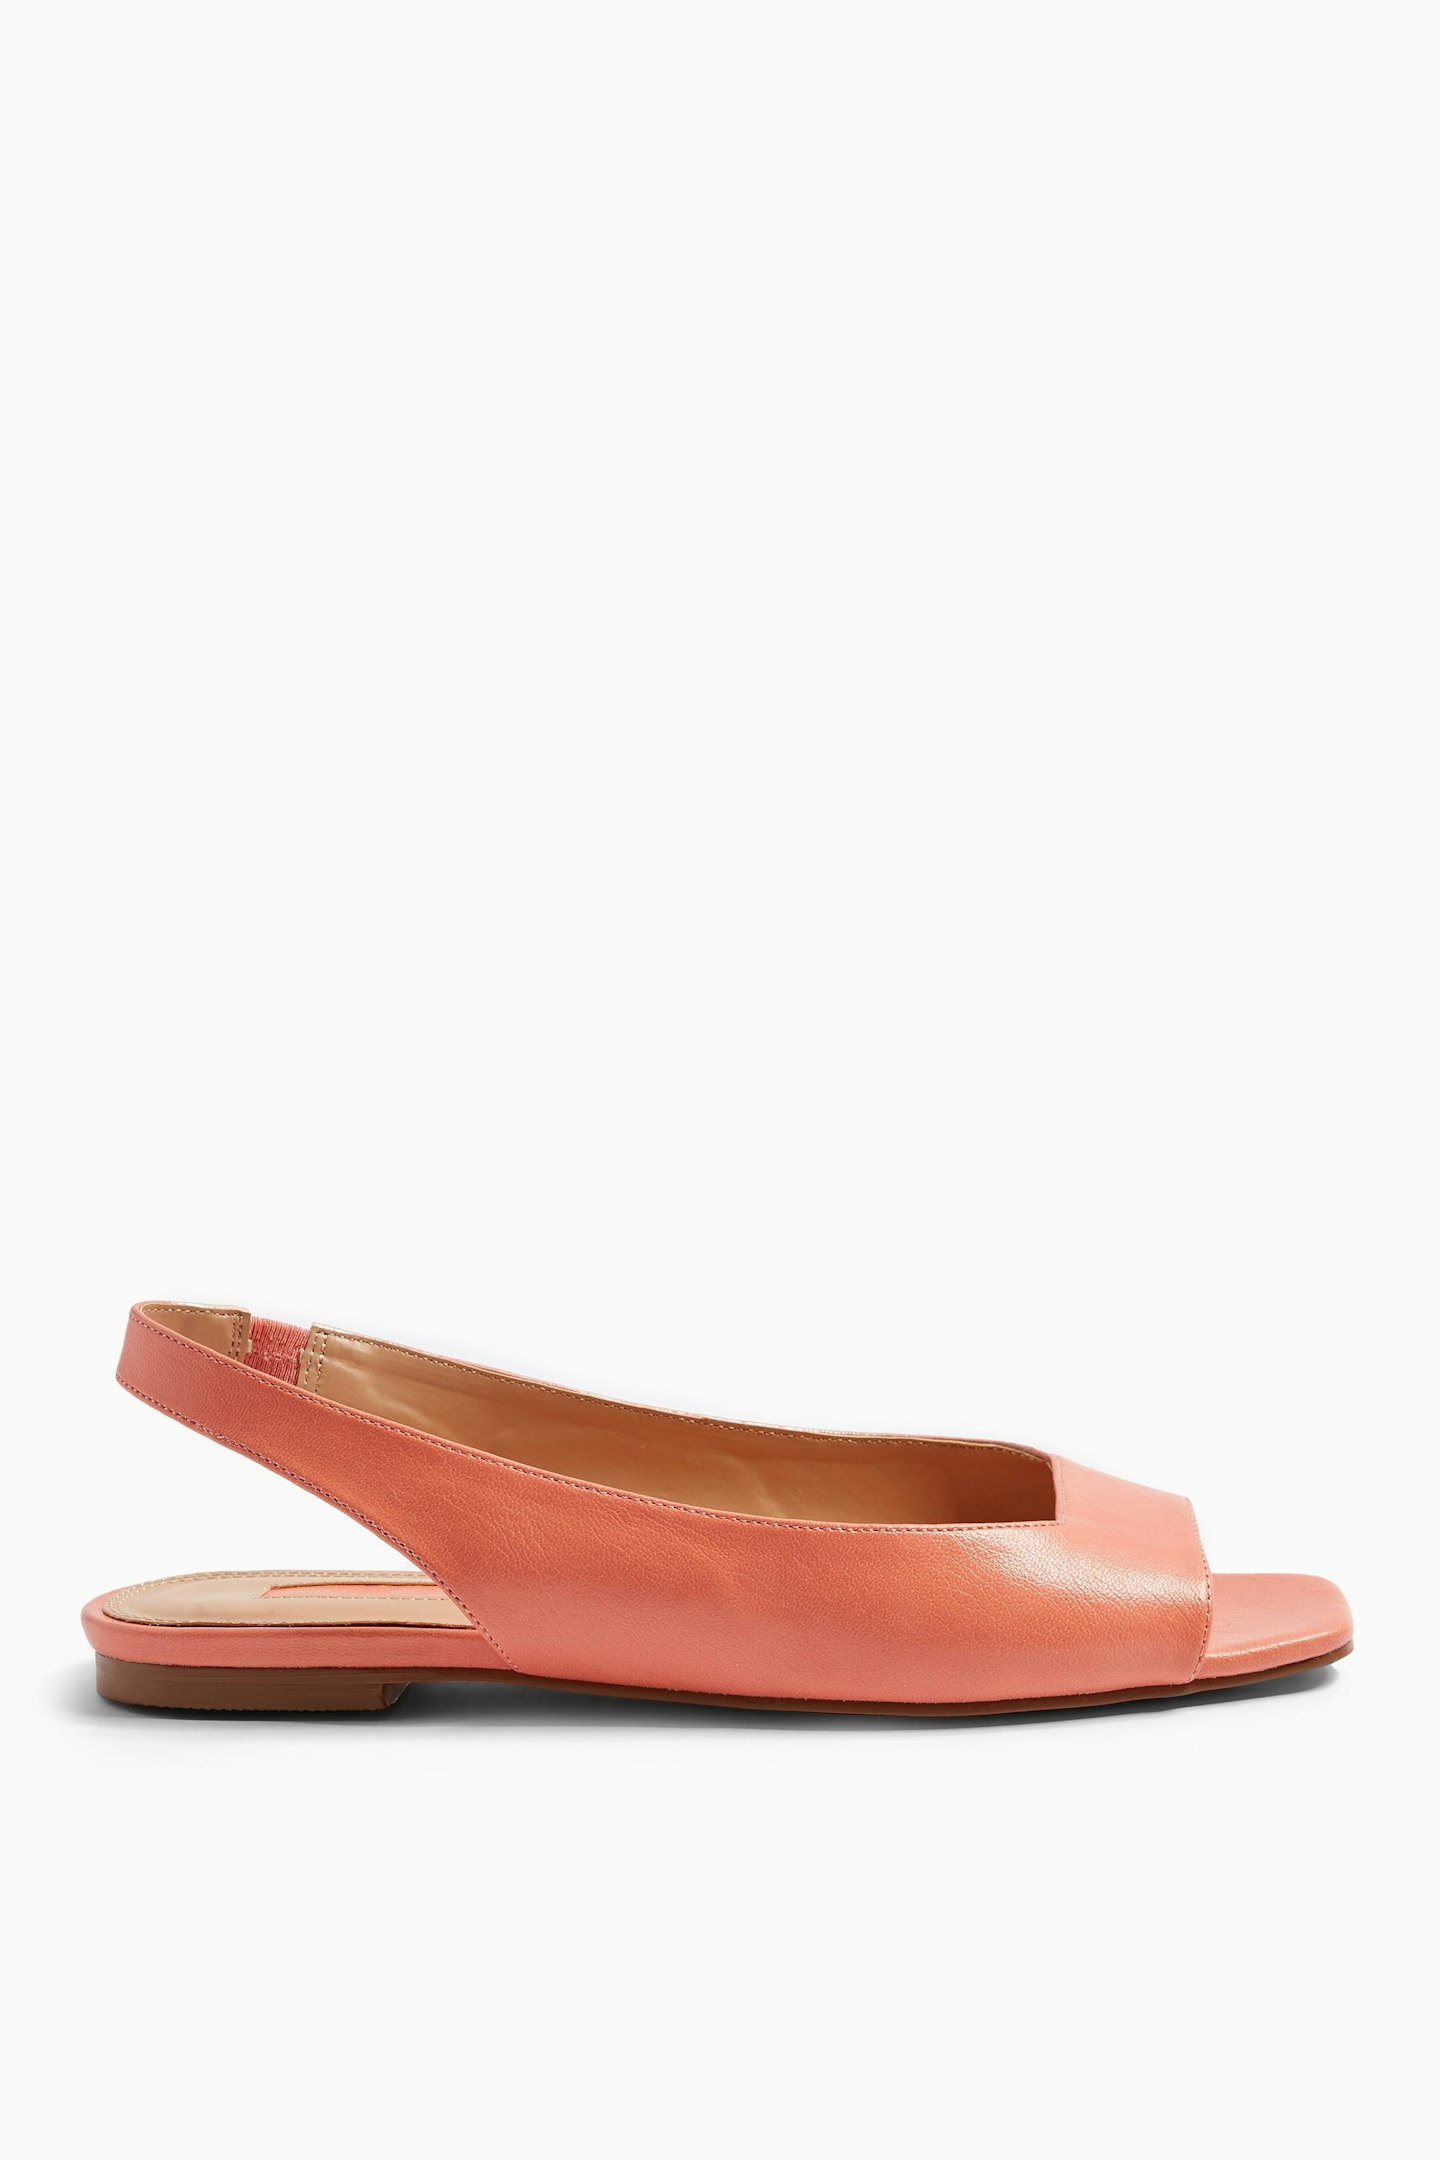 Topshop, Annie Coral Slingback Flats, Was £19, Will Be £7